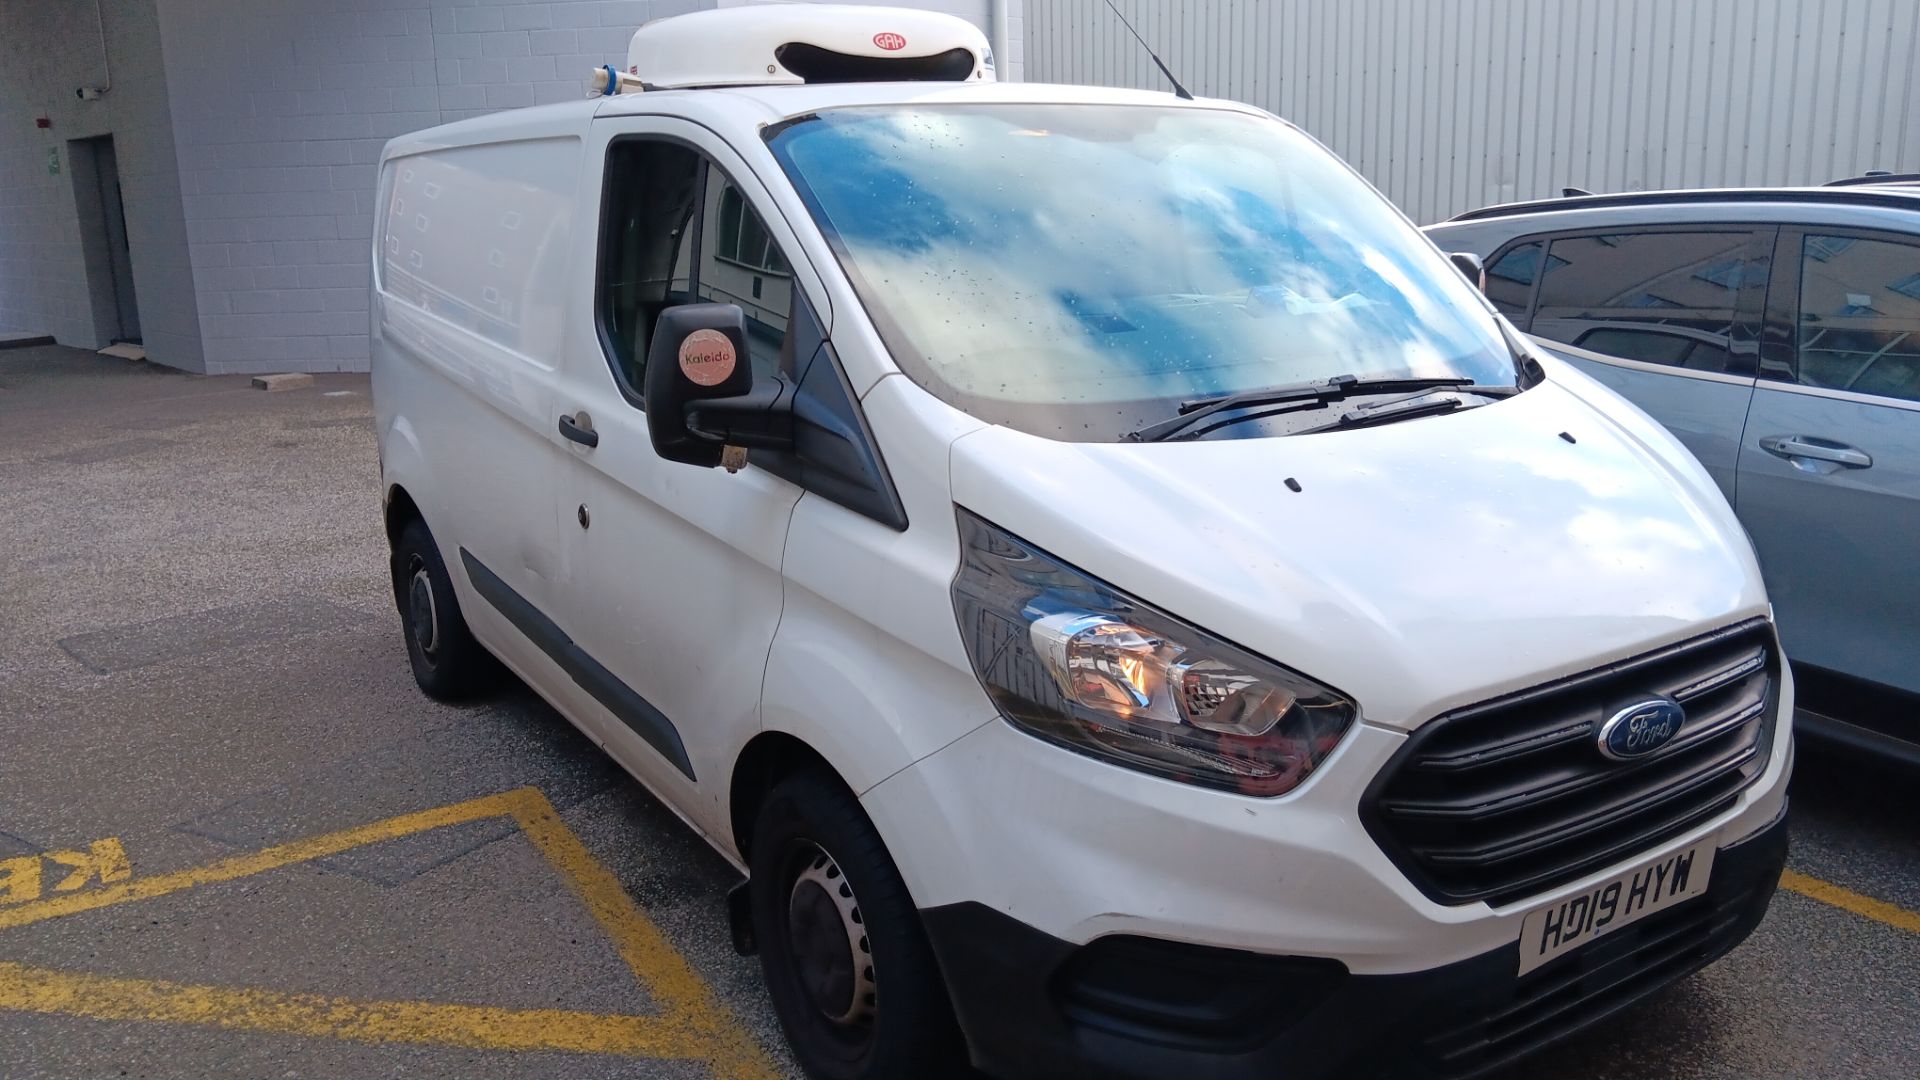 Ford Transit Custom 300 FWD 2.0 TDCi 105pg L1 Low Roof Refrigerated Van with , Registration HD19